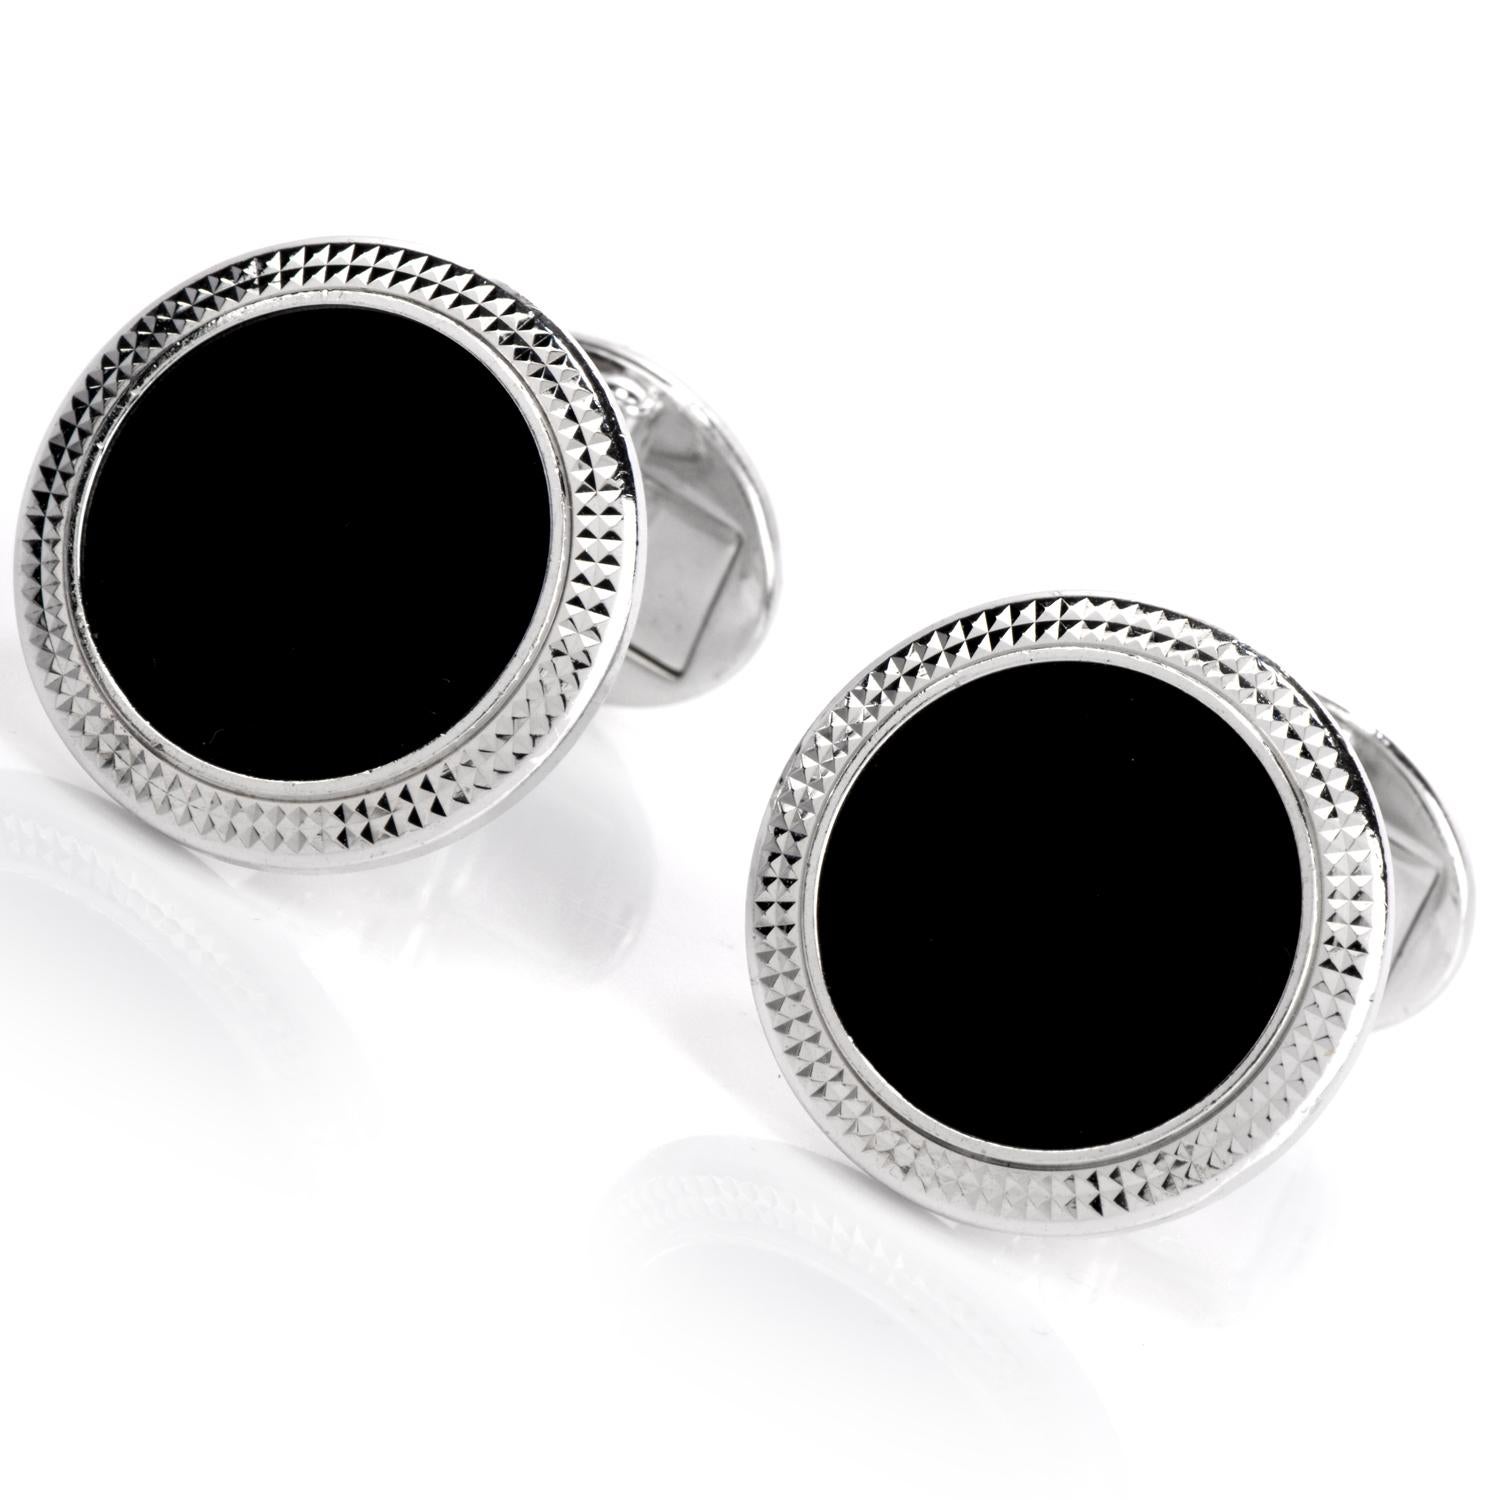 These circa 2000 Patek Philippe Calatrava cufflinks

feature a disc of onyx as a focal

point and crafted in 18K white  gold.

These have a double hobnail bezel design.

Hallmarked and putiry marked.

Measure approx.. 19.04mm diameter.

Highy